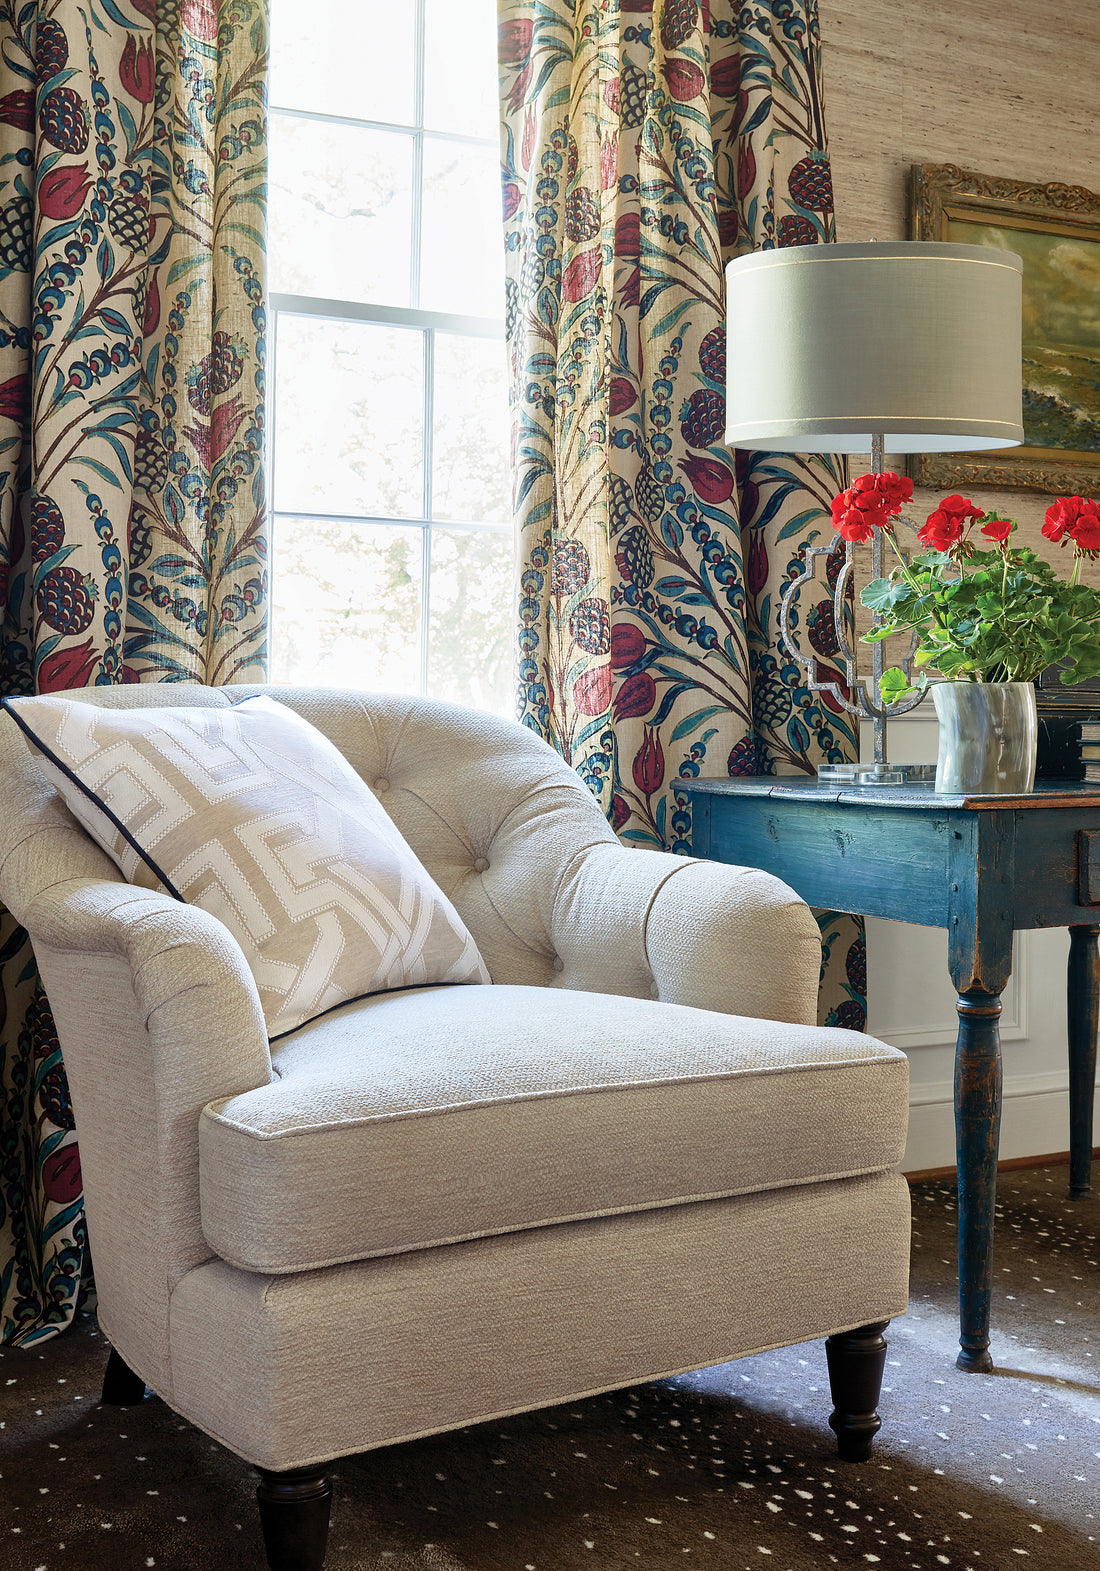 Corneila printed fabric in red and teal color - pattern number F972601 by Thibaut in the Chestnut Hill collection